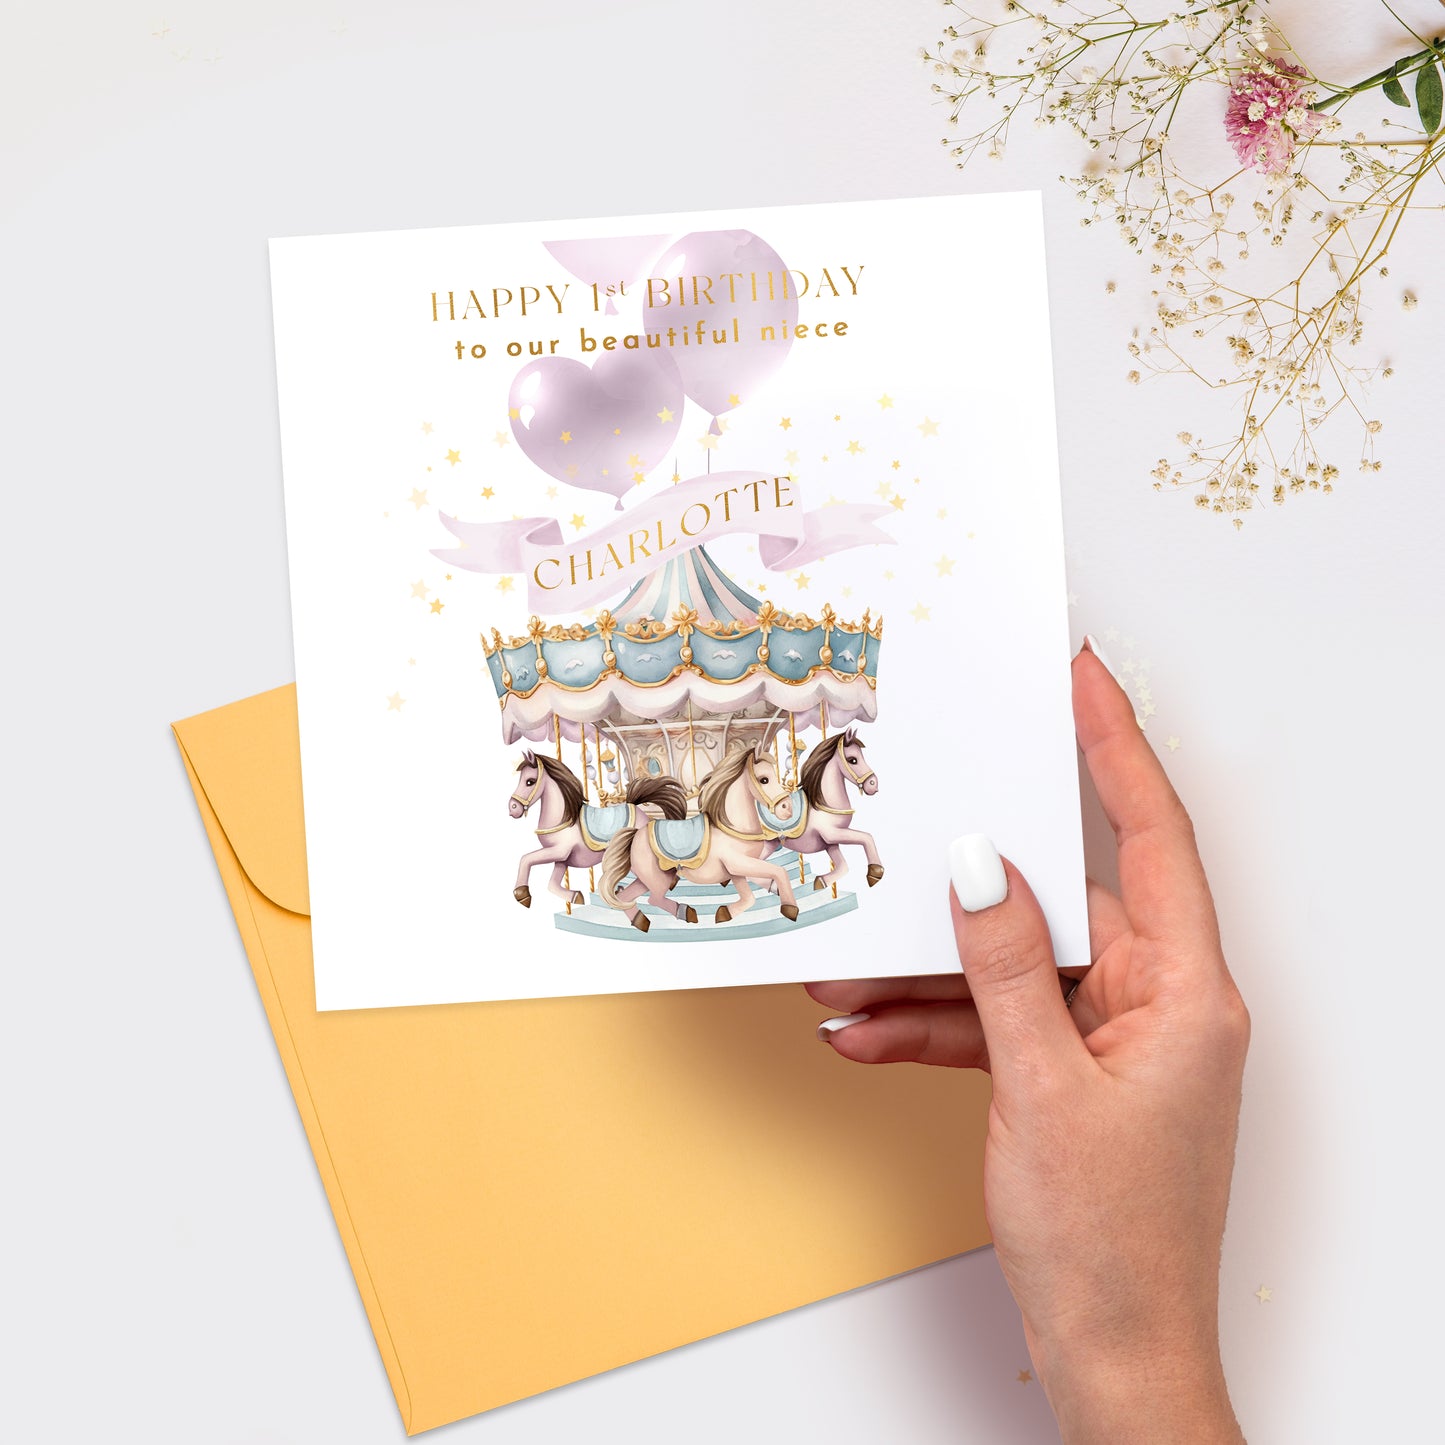 1st Birthday Carousel Greeting Card for Nieces